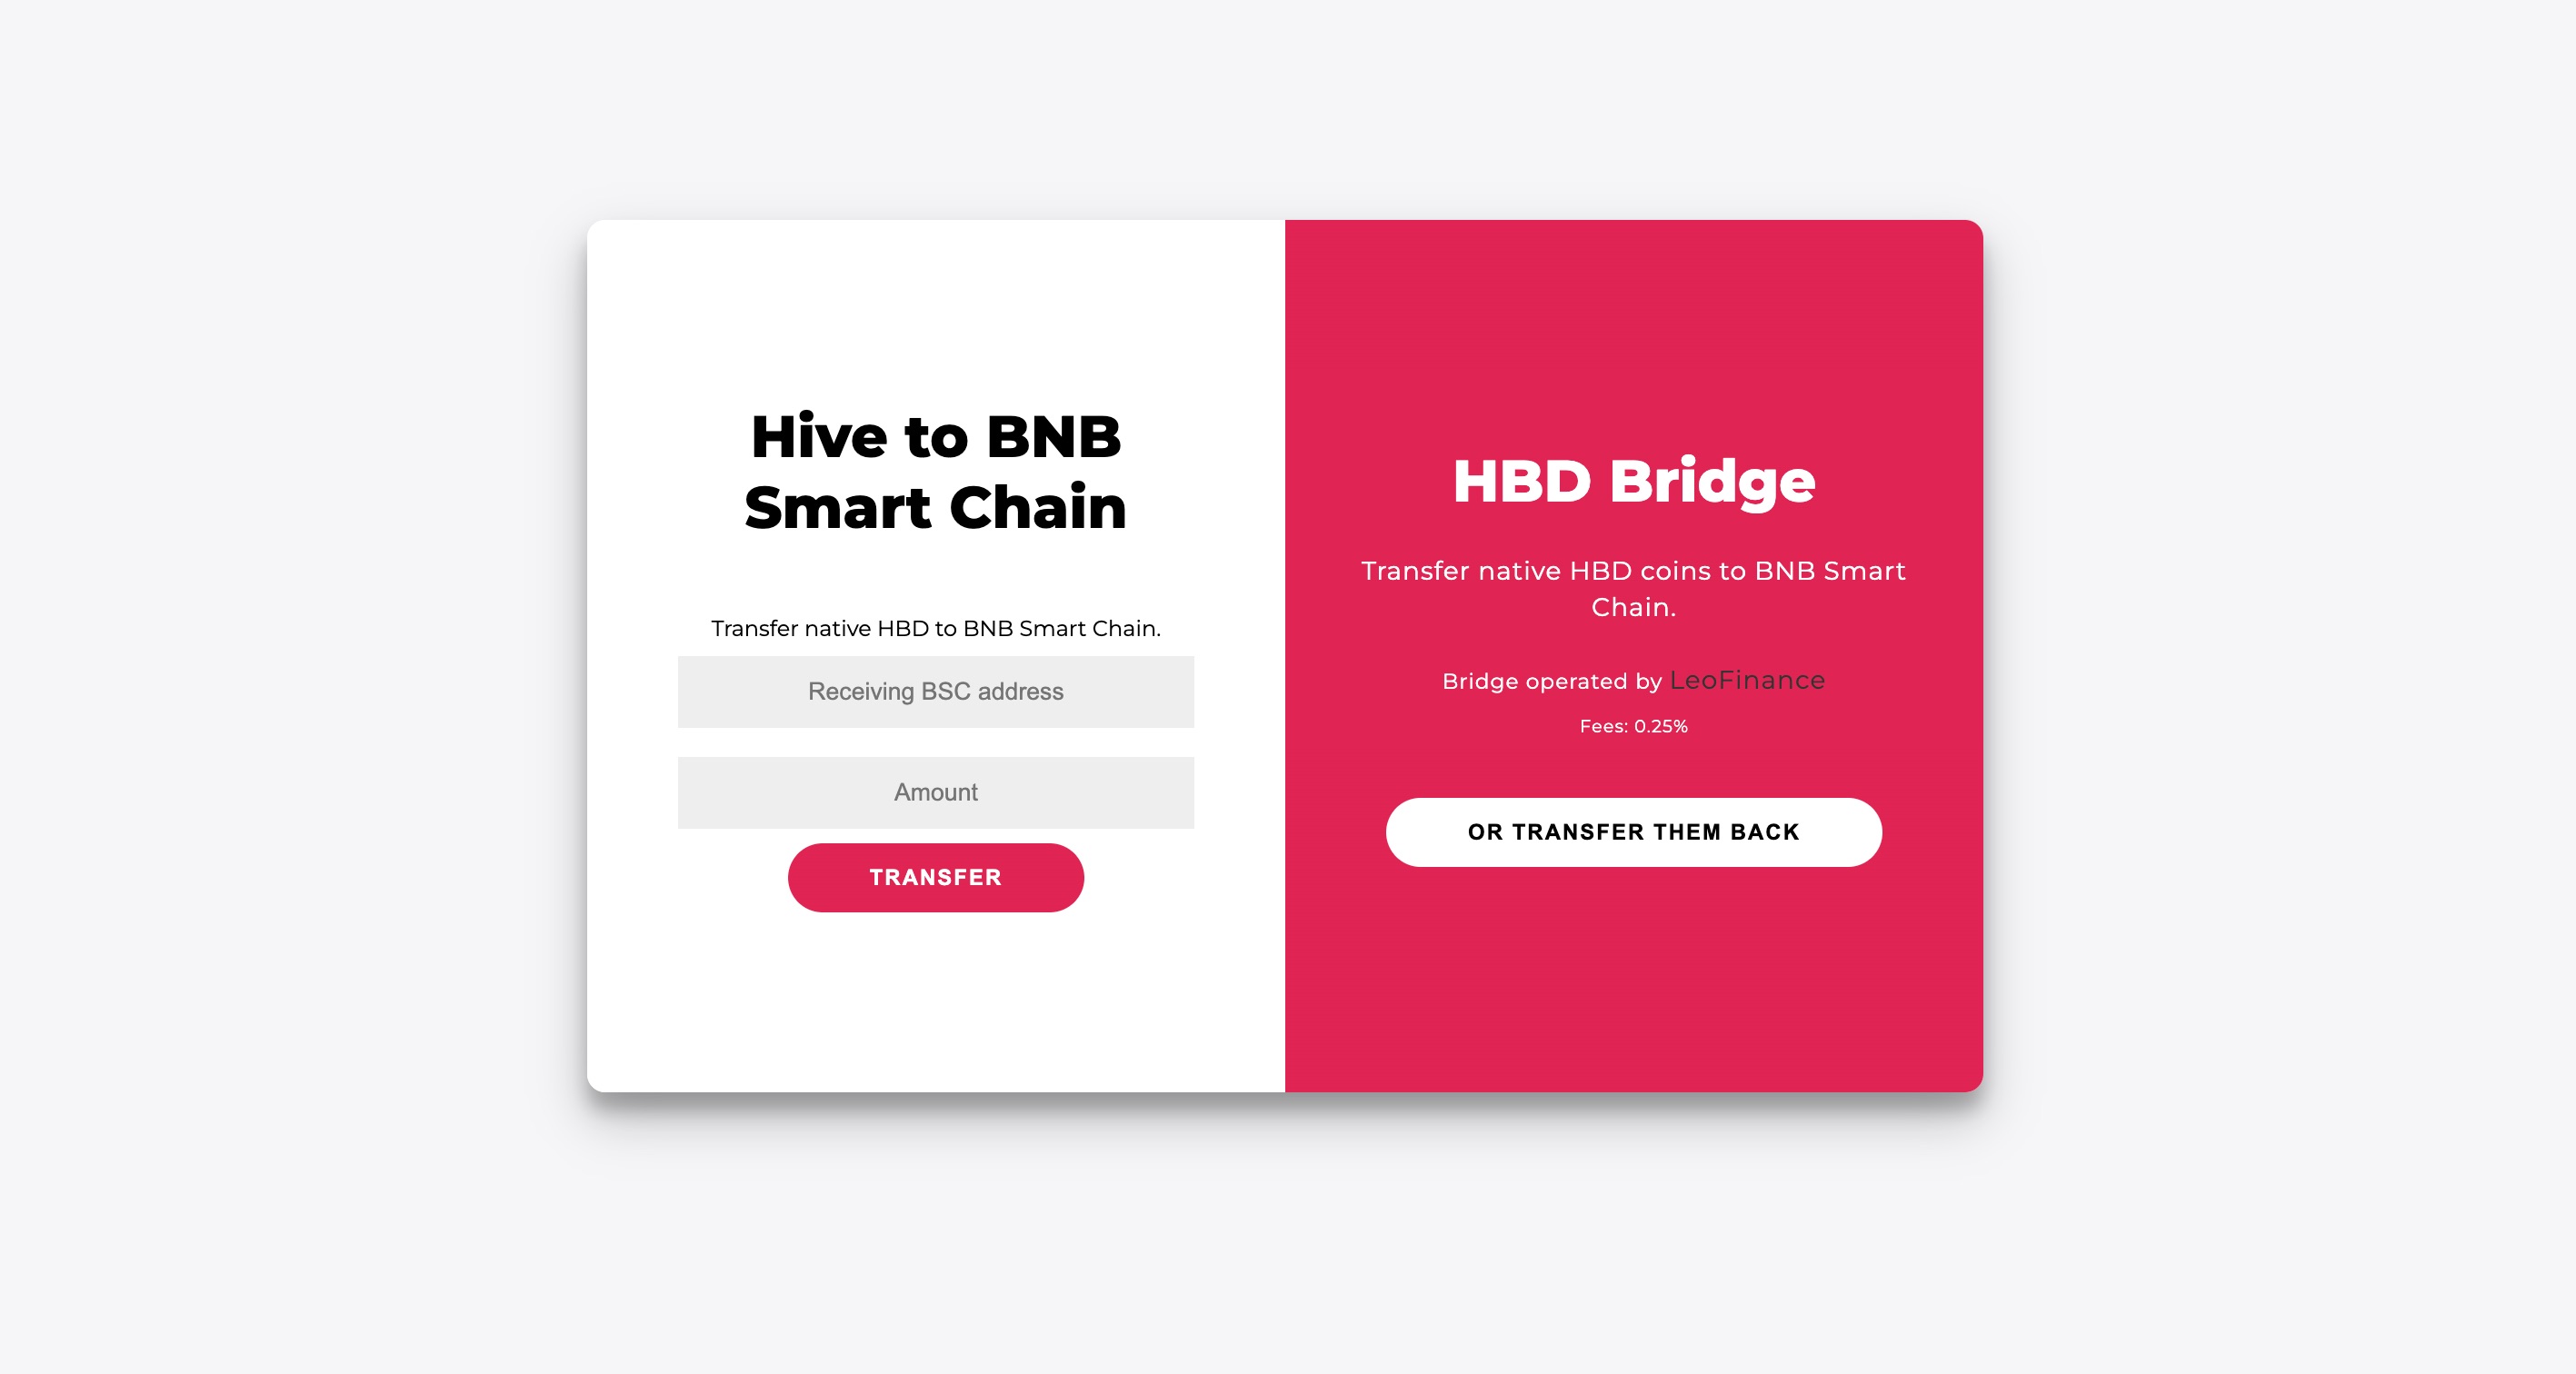 Bridging your non-KYC HBD back to Hive.